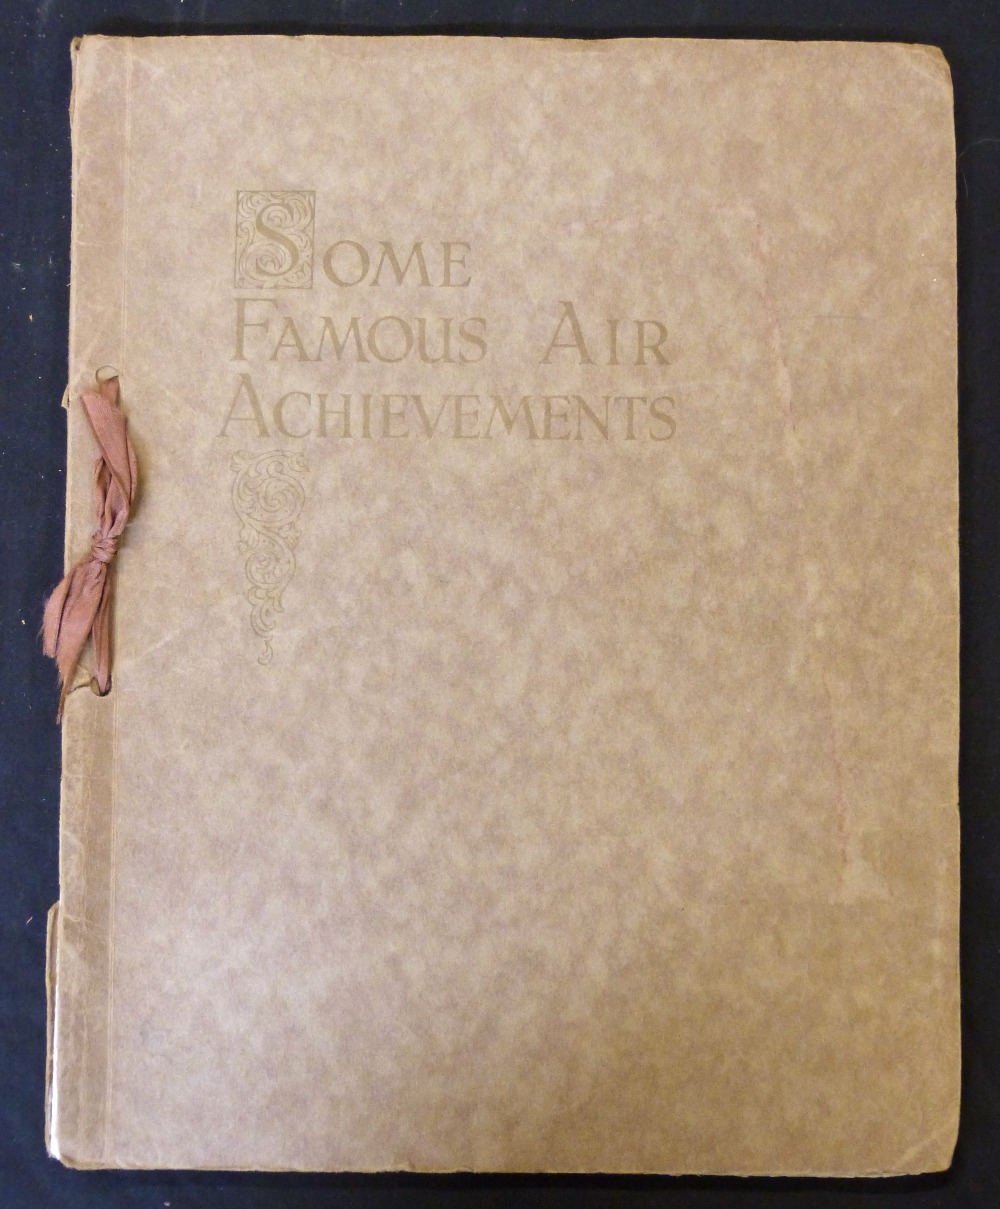 SOME FAMOUS AIR ACHIEVEMENTS, London, D Napier & Son, [1930], 8 tipped in plates, signed in pencil